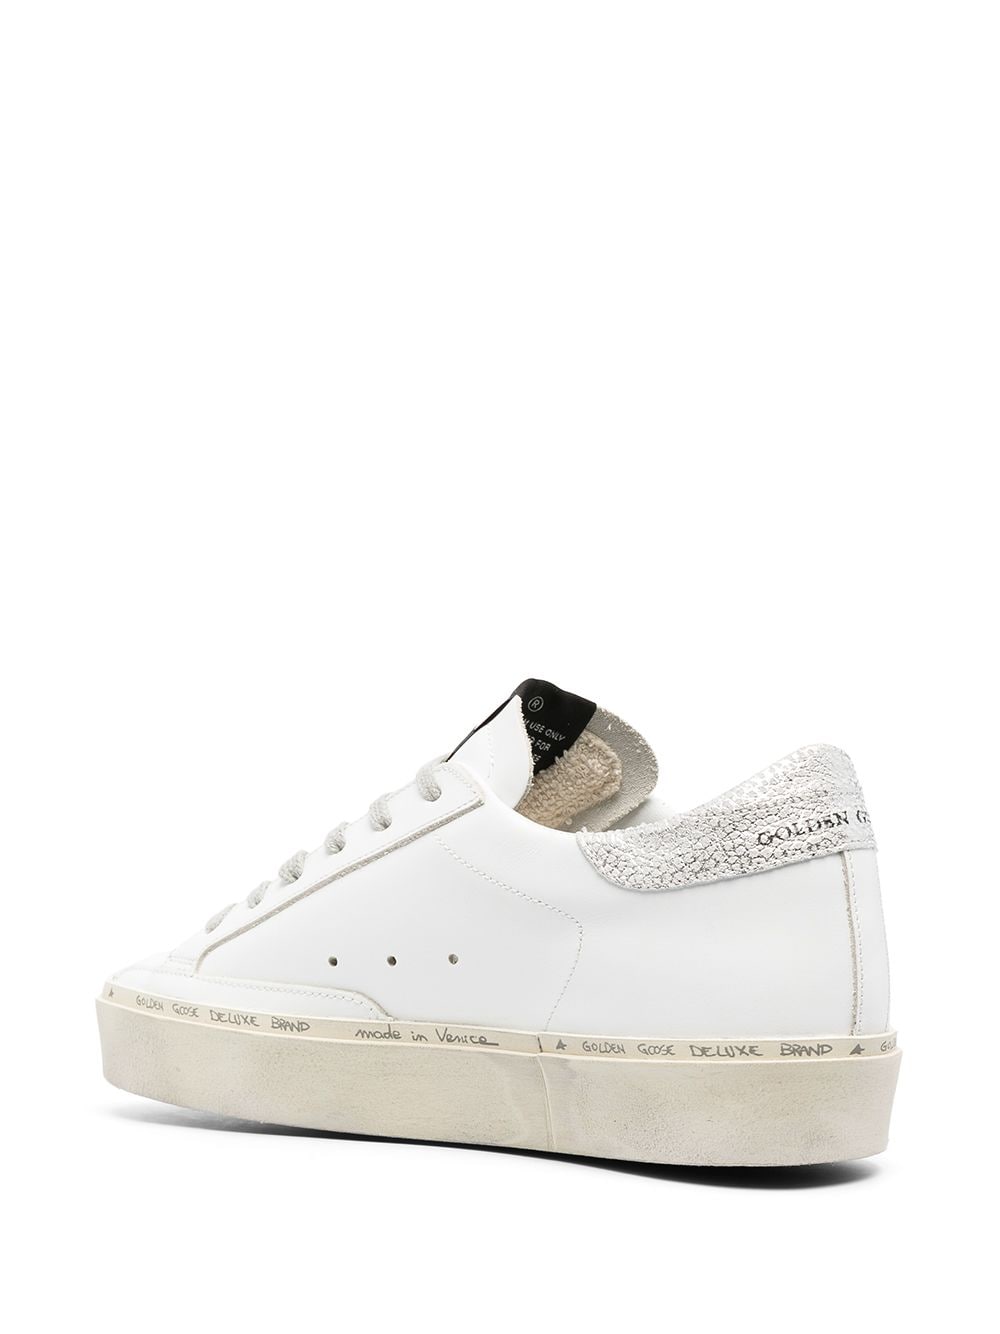 White Leather and Rubber Hi Star Sneakers for Women